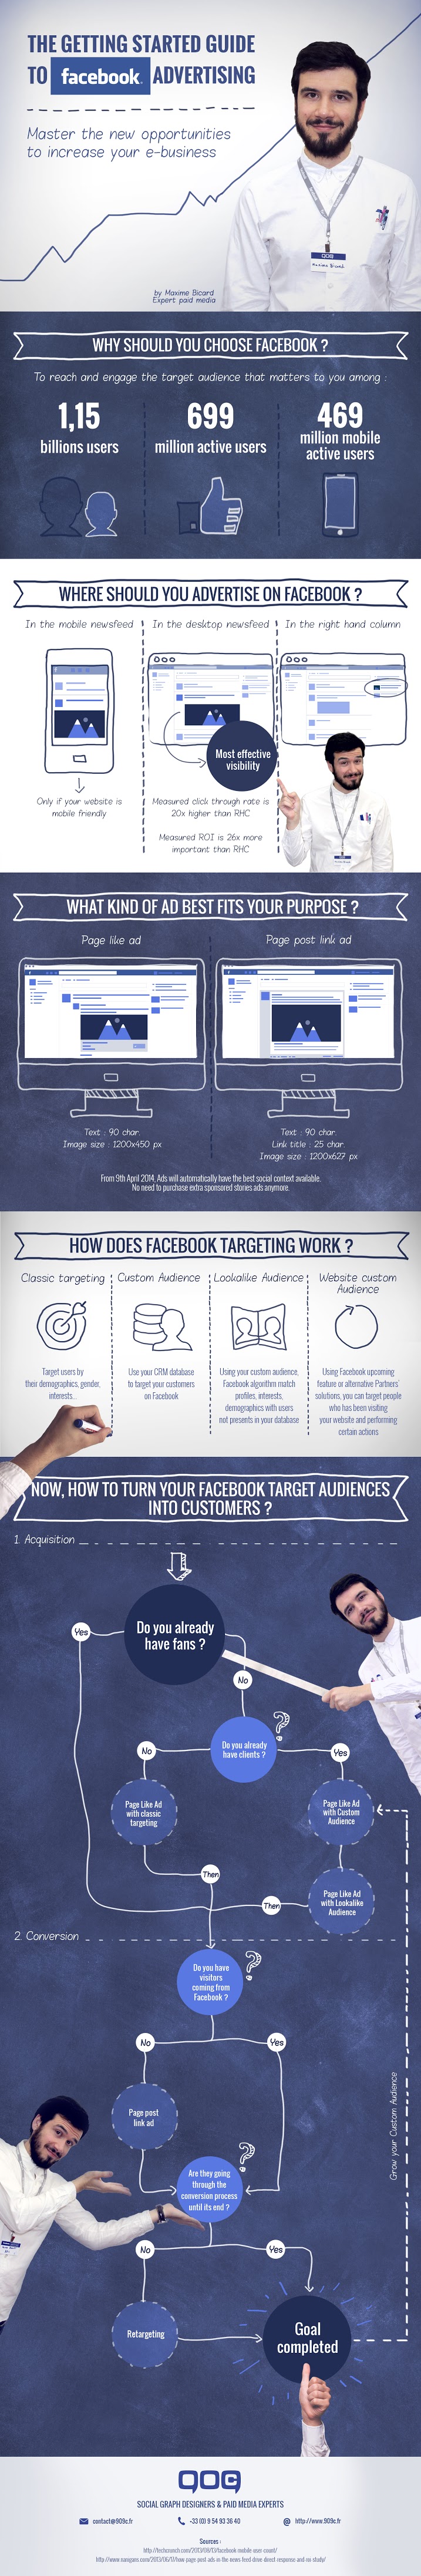 Getting started with Facebook advertising - infographic